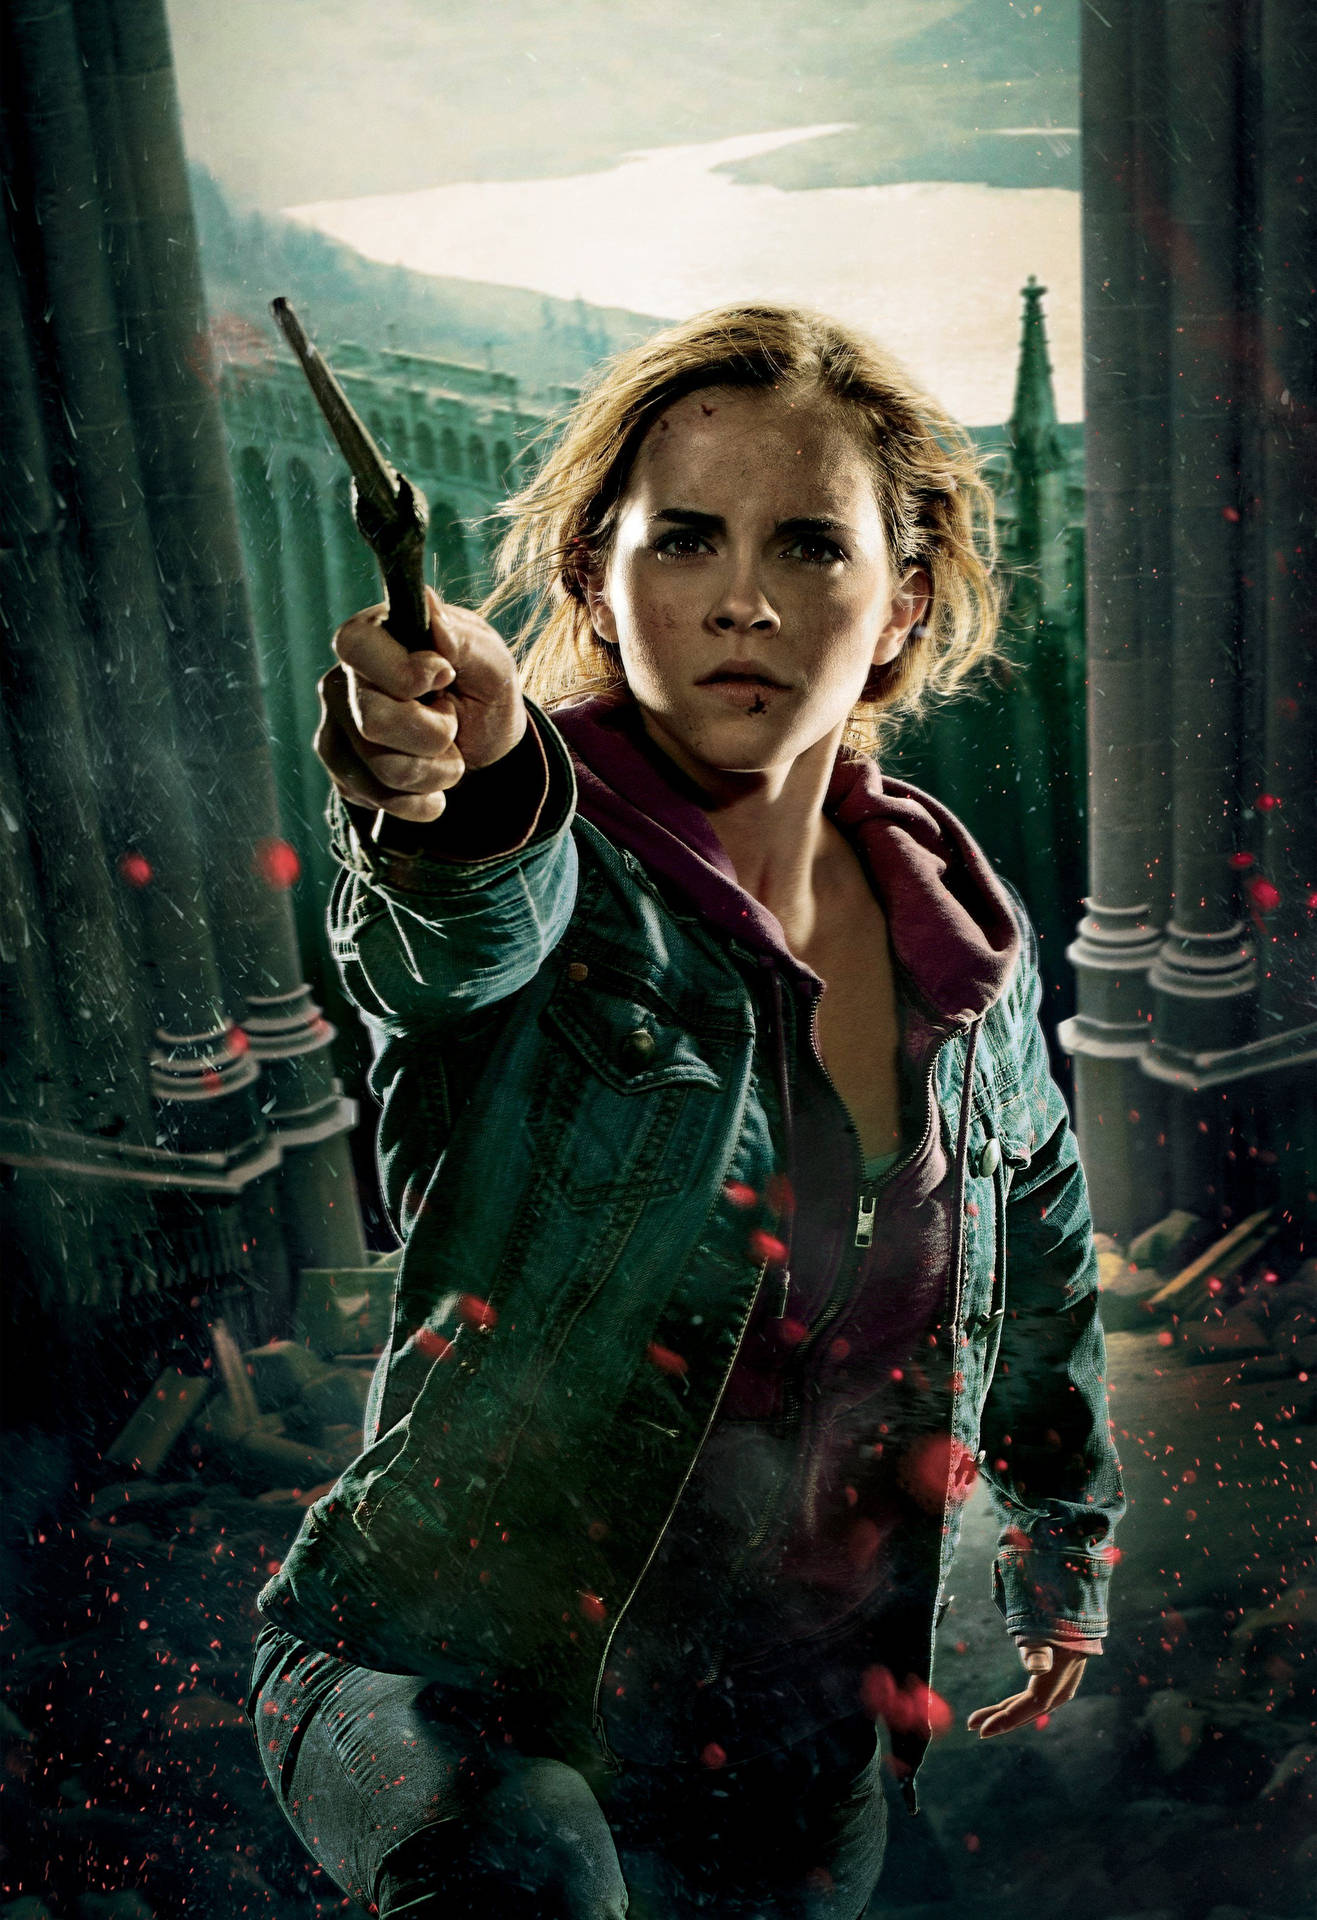 “hermione Granger, The Powerful Witch” Background